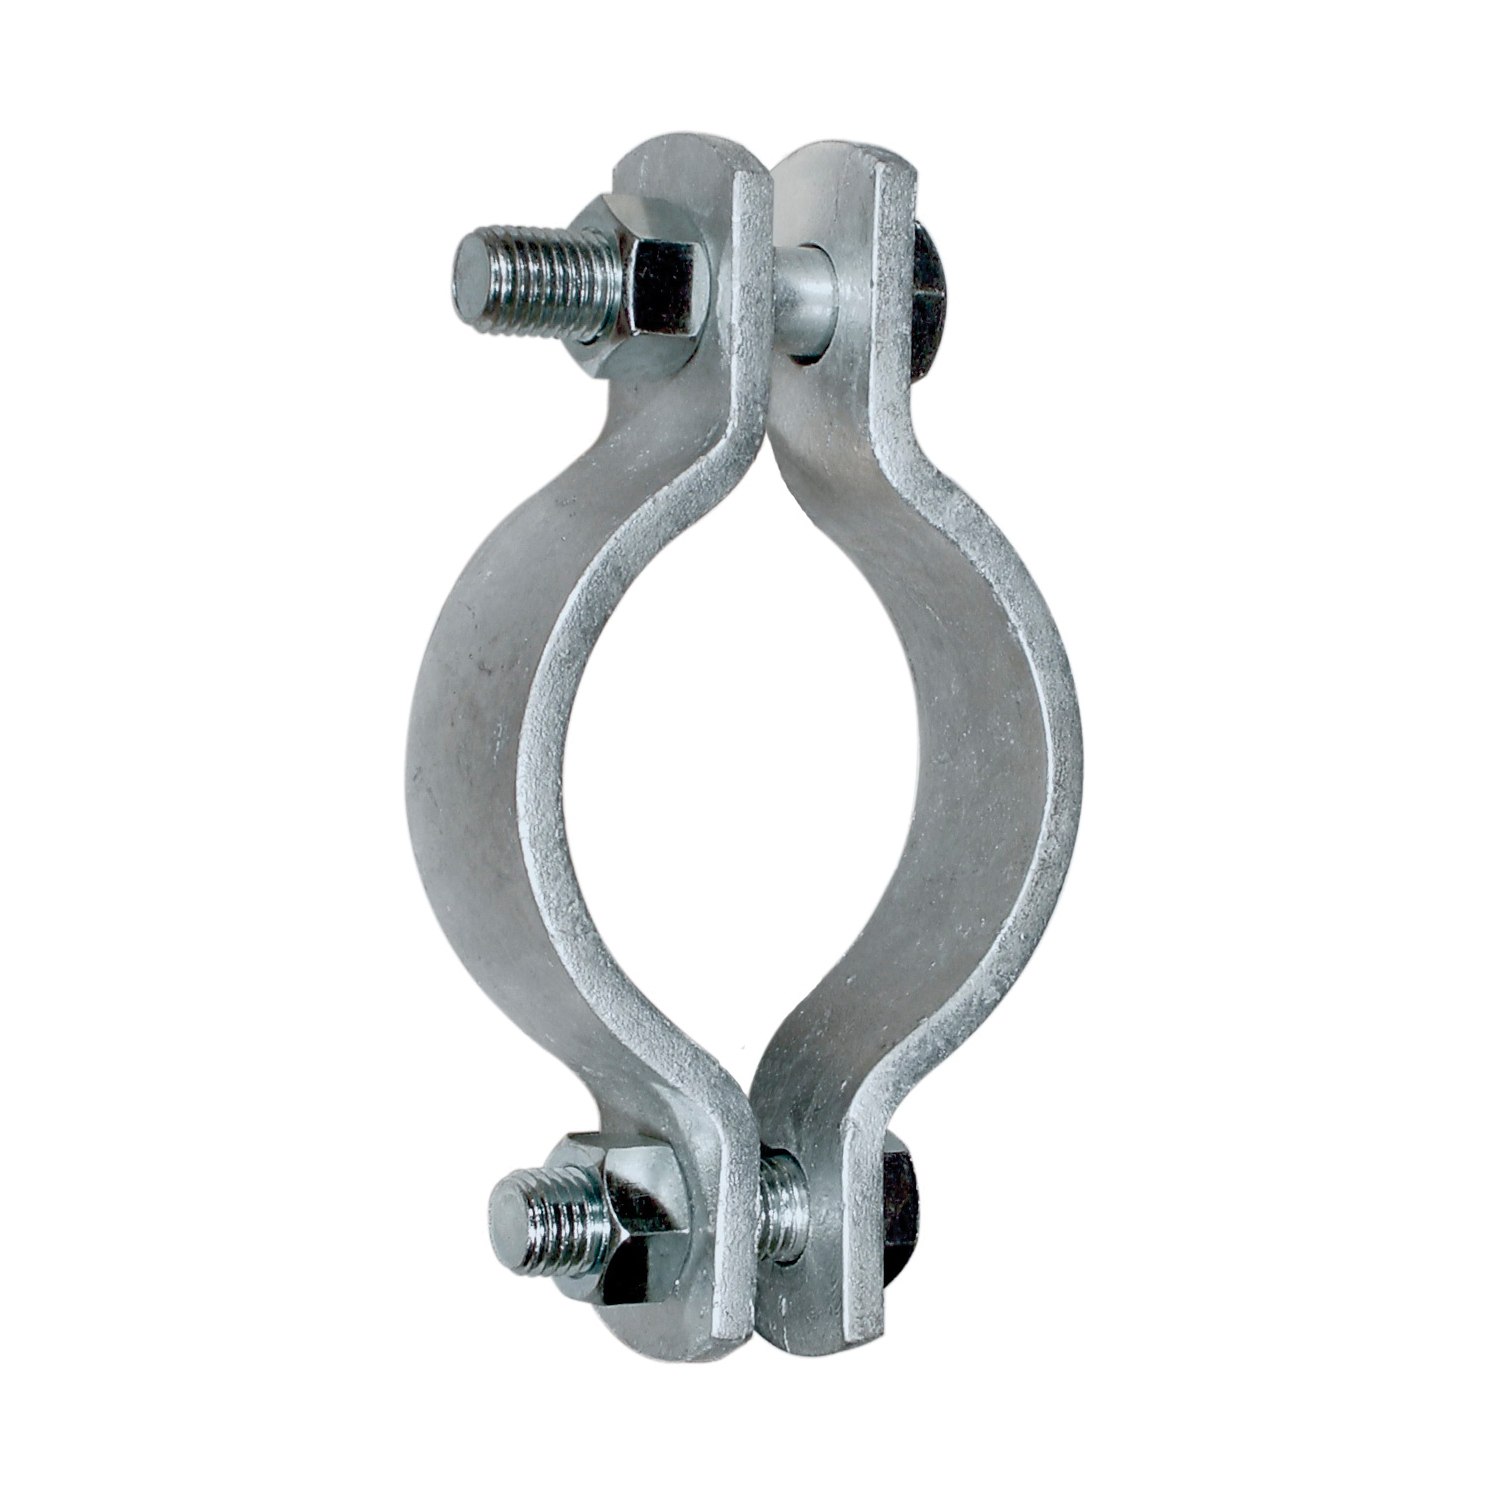 Anvil® 0500093513 FIG 212 Medium Pipe Clamp, 1/2 in Nominal, Clamp Connection, Carbon steel Clamp, Plain, Domestic